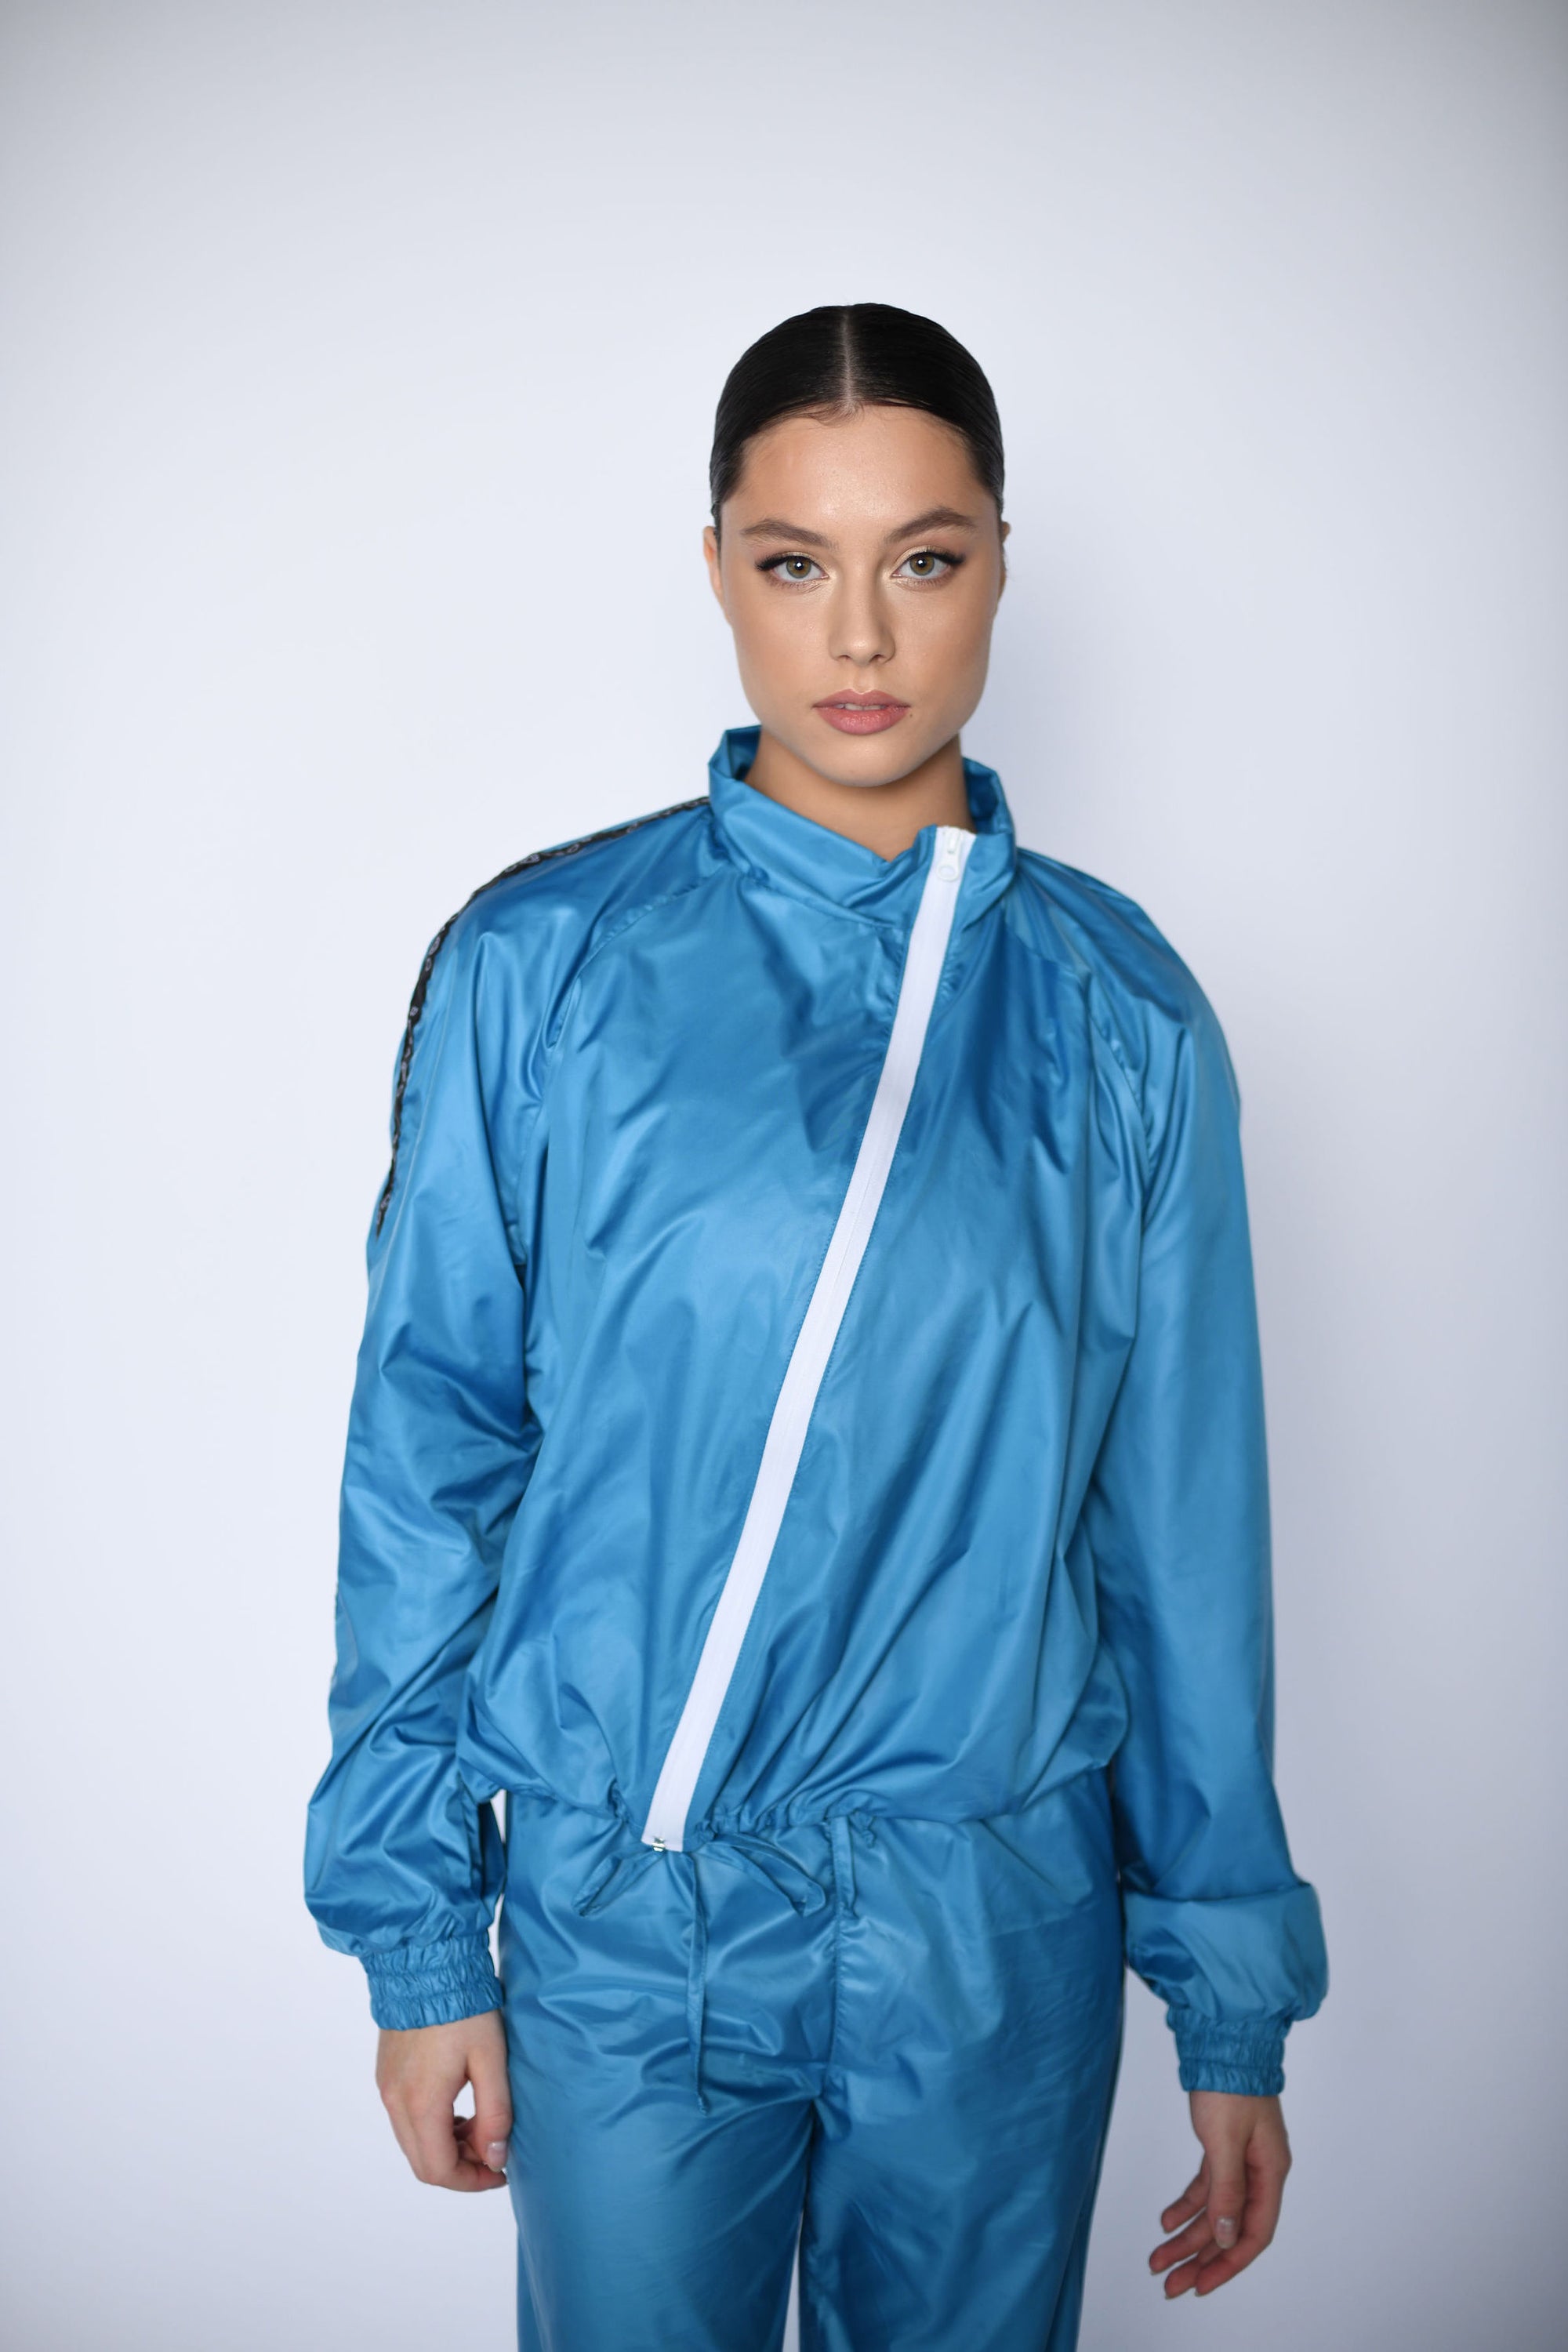 NEW URBAN SWAN COLLECTION S/S 23 | Ice blue jacket